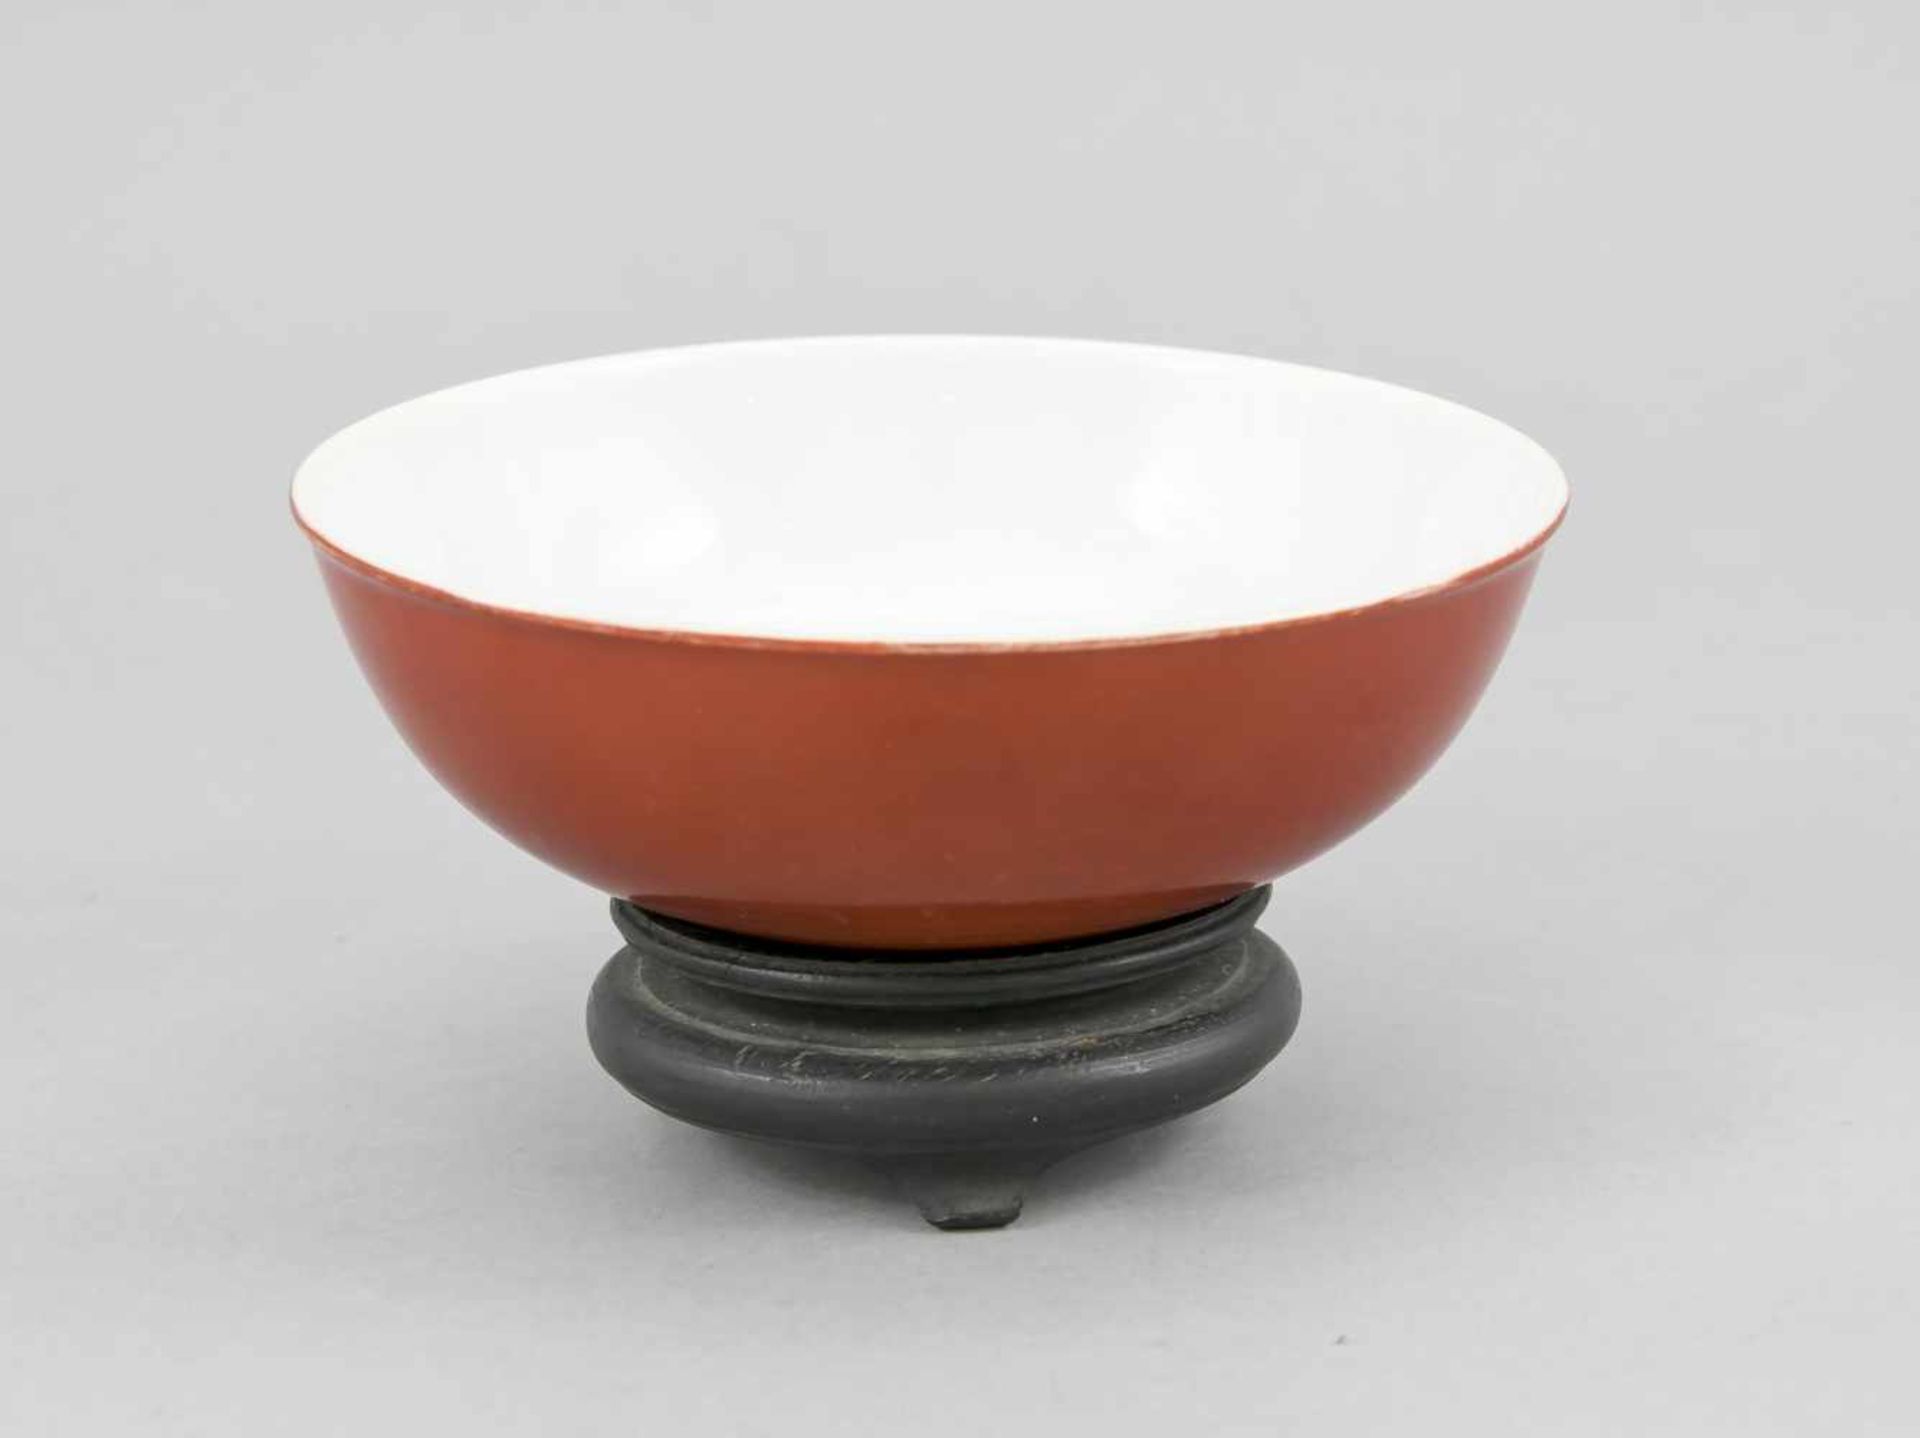 Monochrome cup, China, probably 19th cent. Outside in iron red, in the center of the